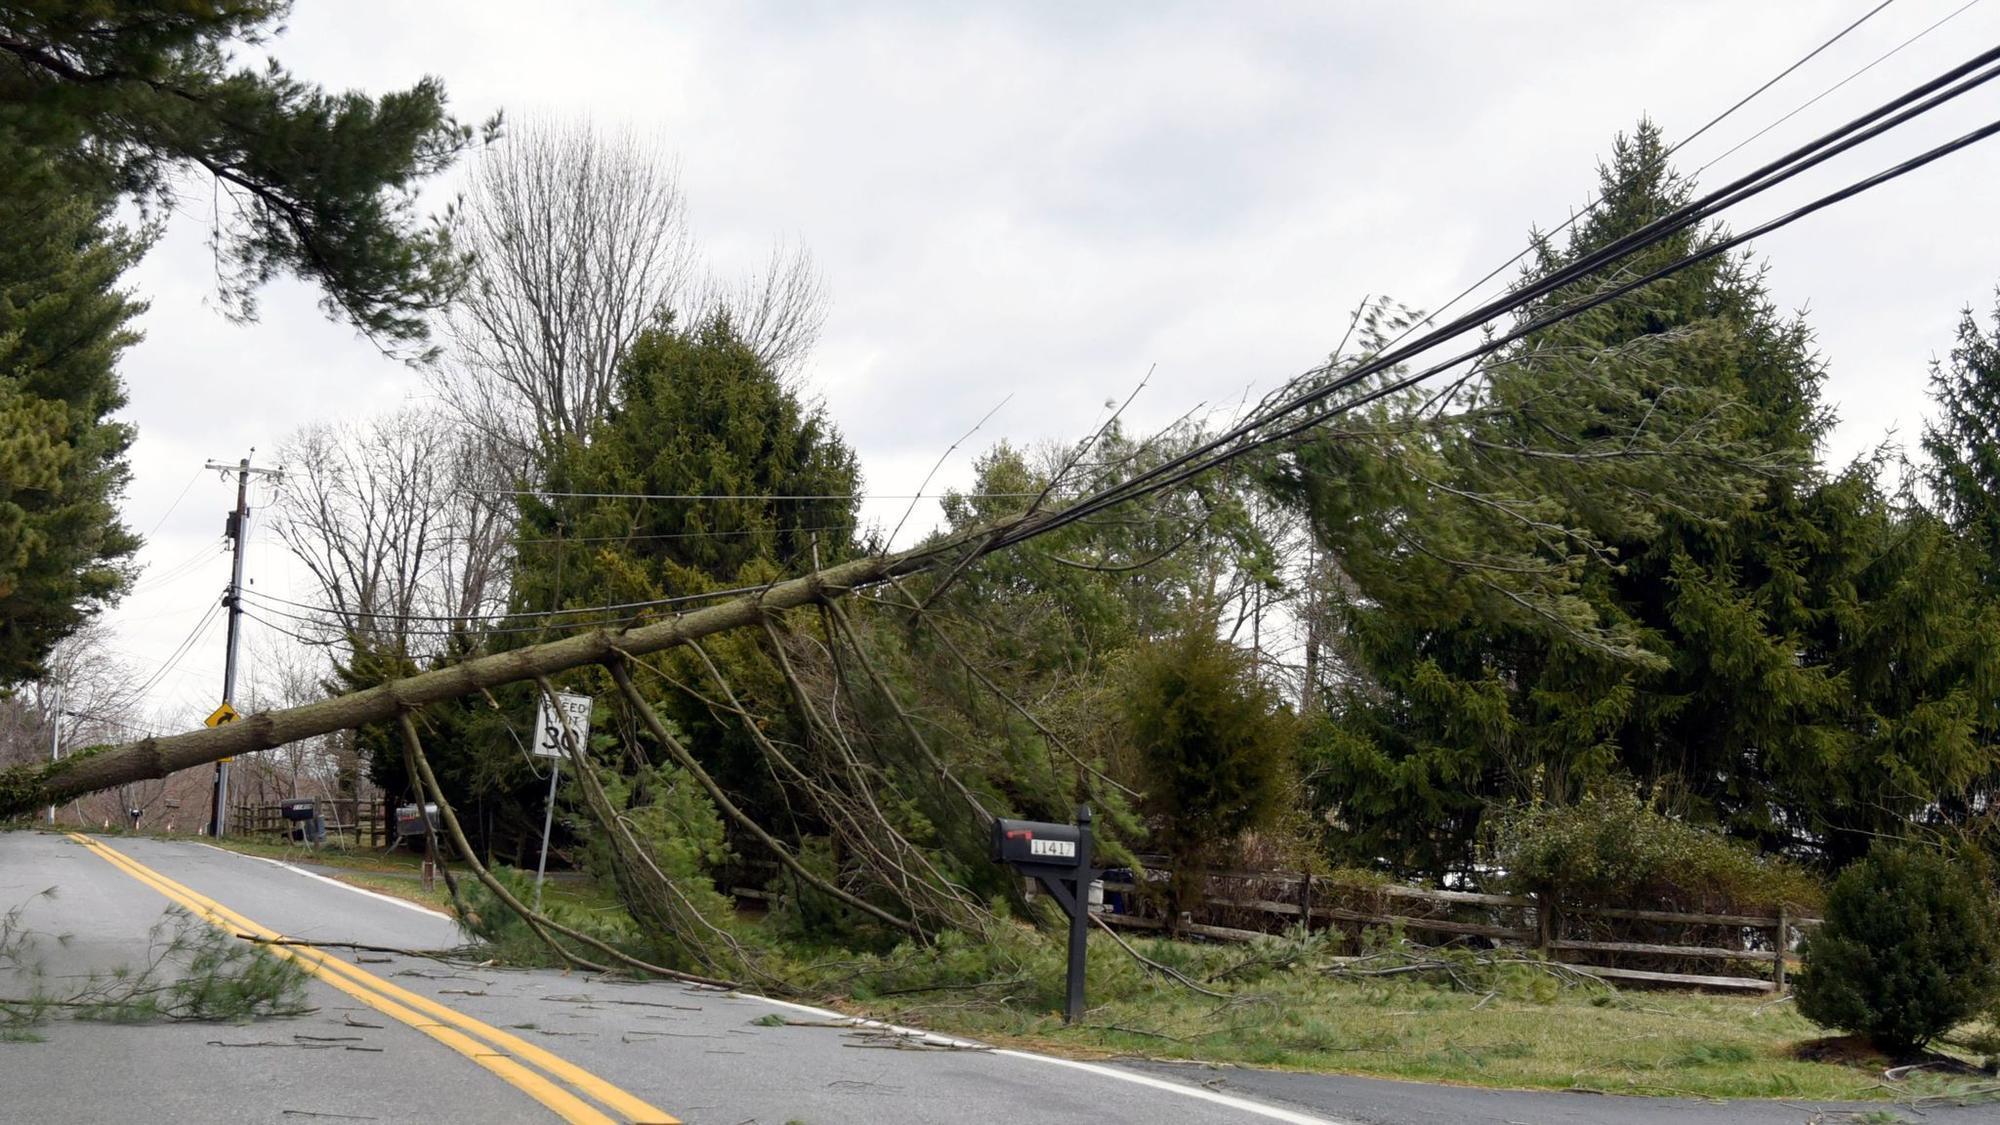 BGE says nearly 400,000 lost power in Baltimore region in storm, about 173,000 restored ...